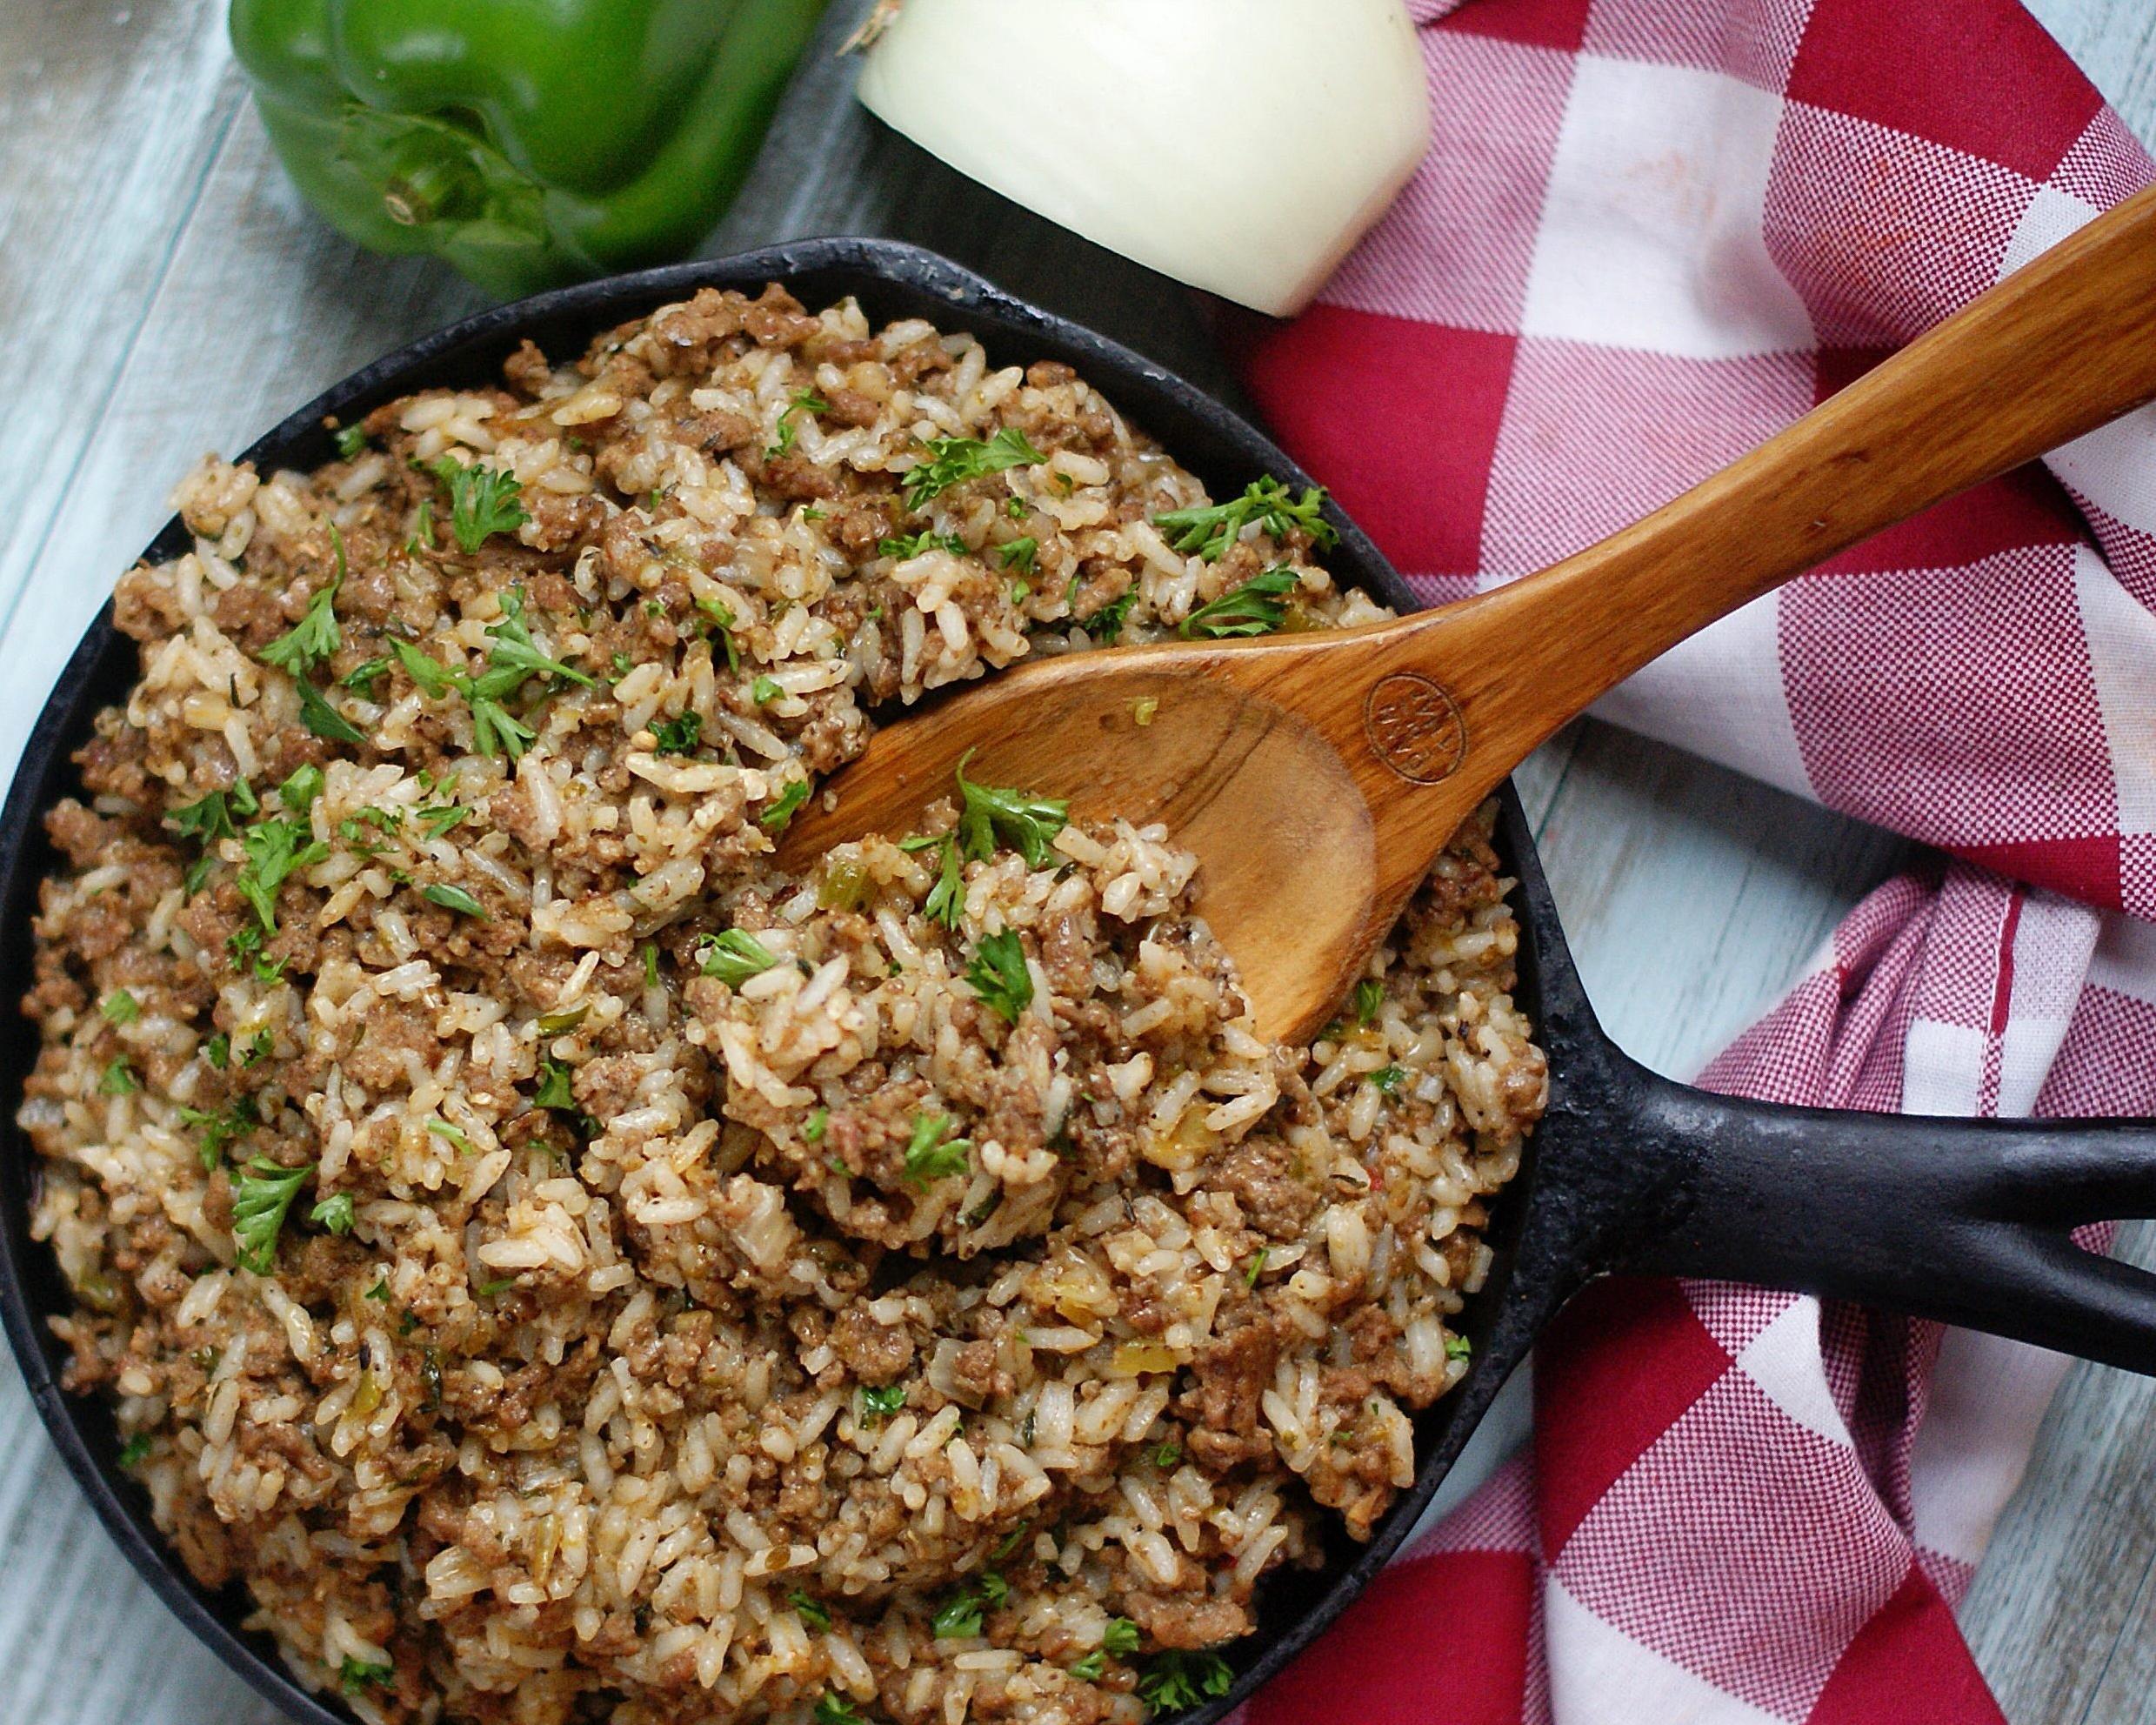  Every bite of this savory rice dish will take your taste buds on a journey to the heart of the South.